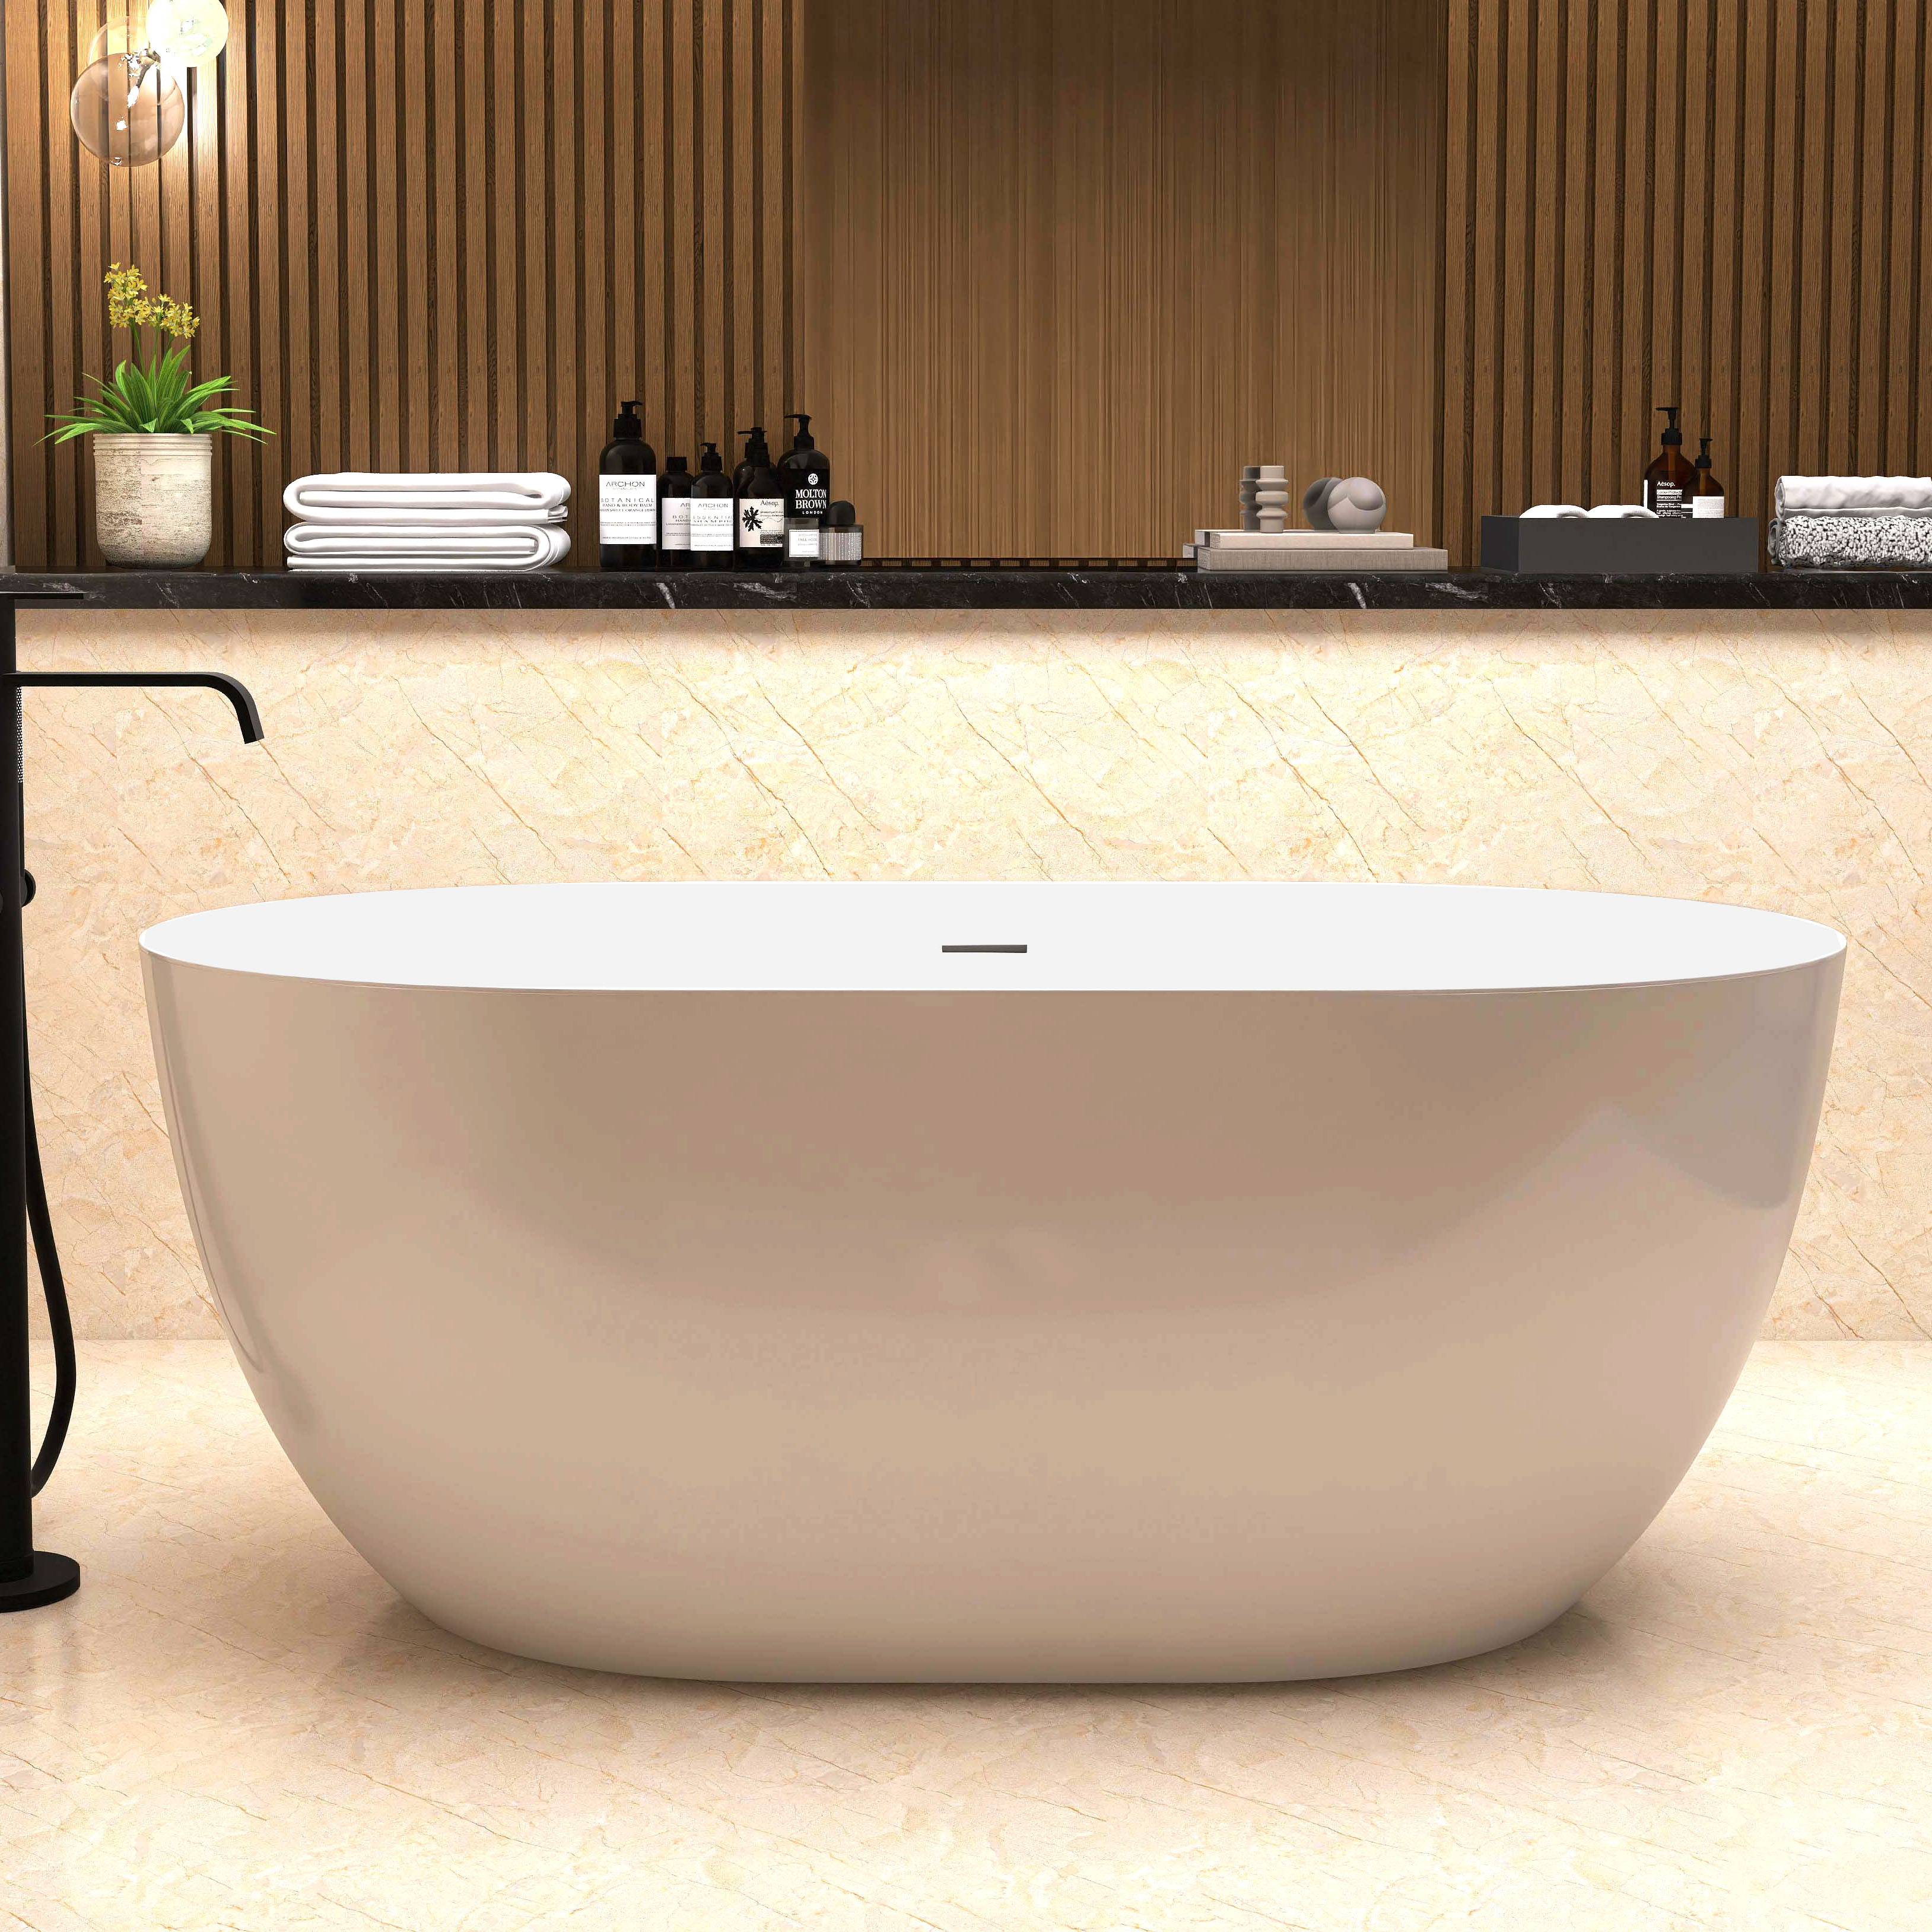 67" Acrylic Free Standing Tub - Classic Oval Shape Soaking Tub, Adjustable Freestanding Bathtub with Integrated Slotted Overflow and Chrome Pop-up Drain Anti-clogging Gloss White-CASAINC